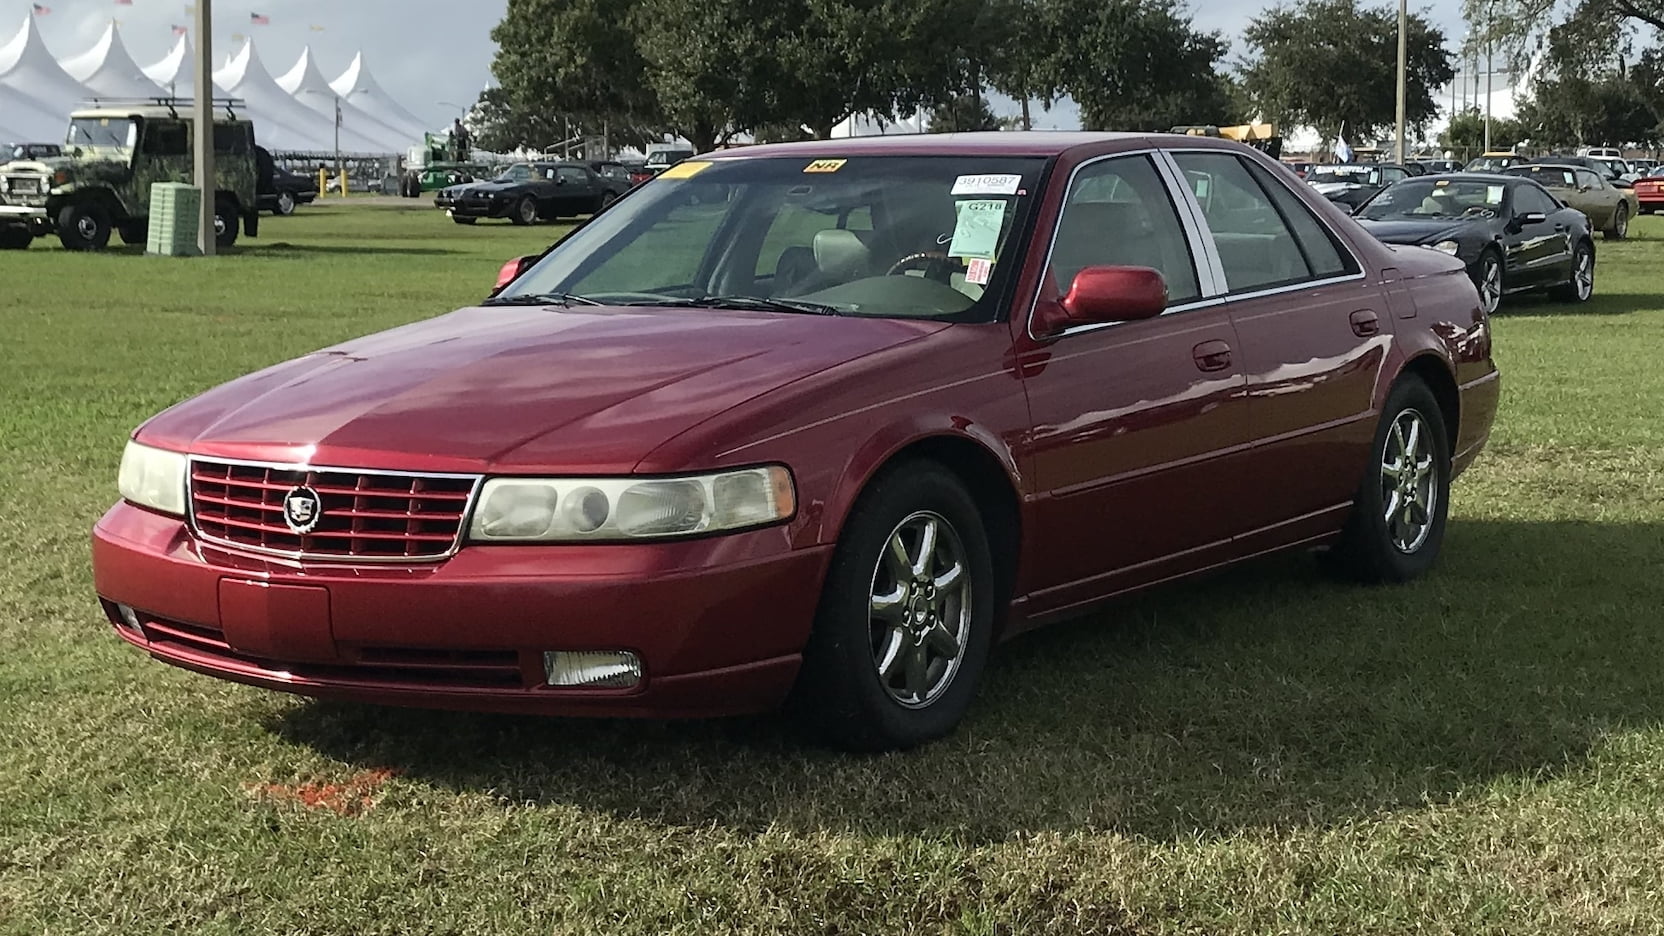 2002 Cadillac Seville STS | G218 | Kissimmee 2020